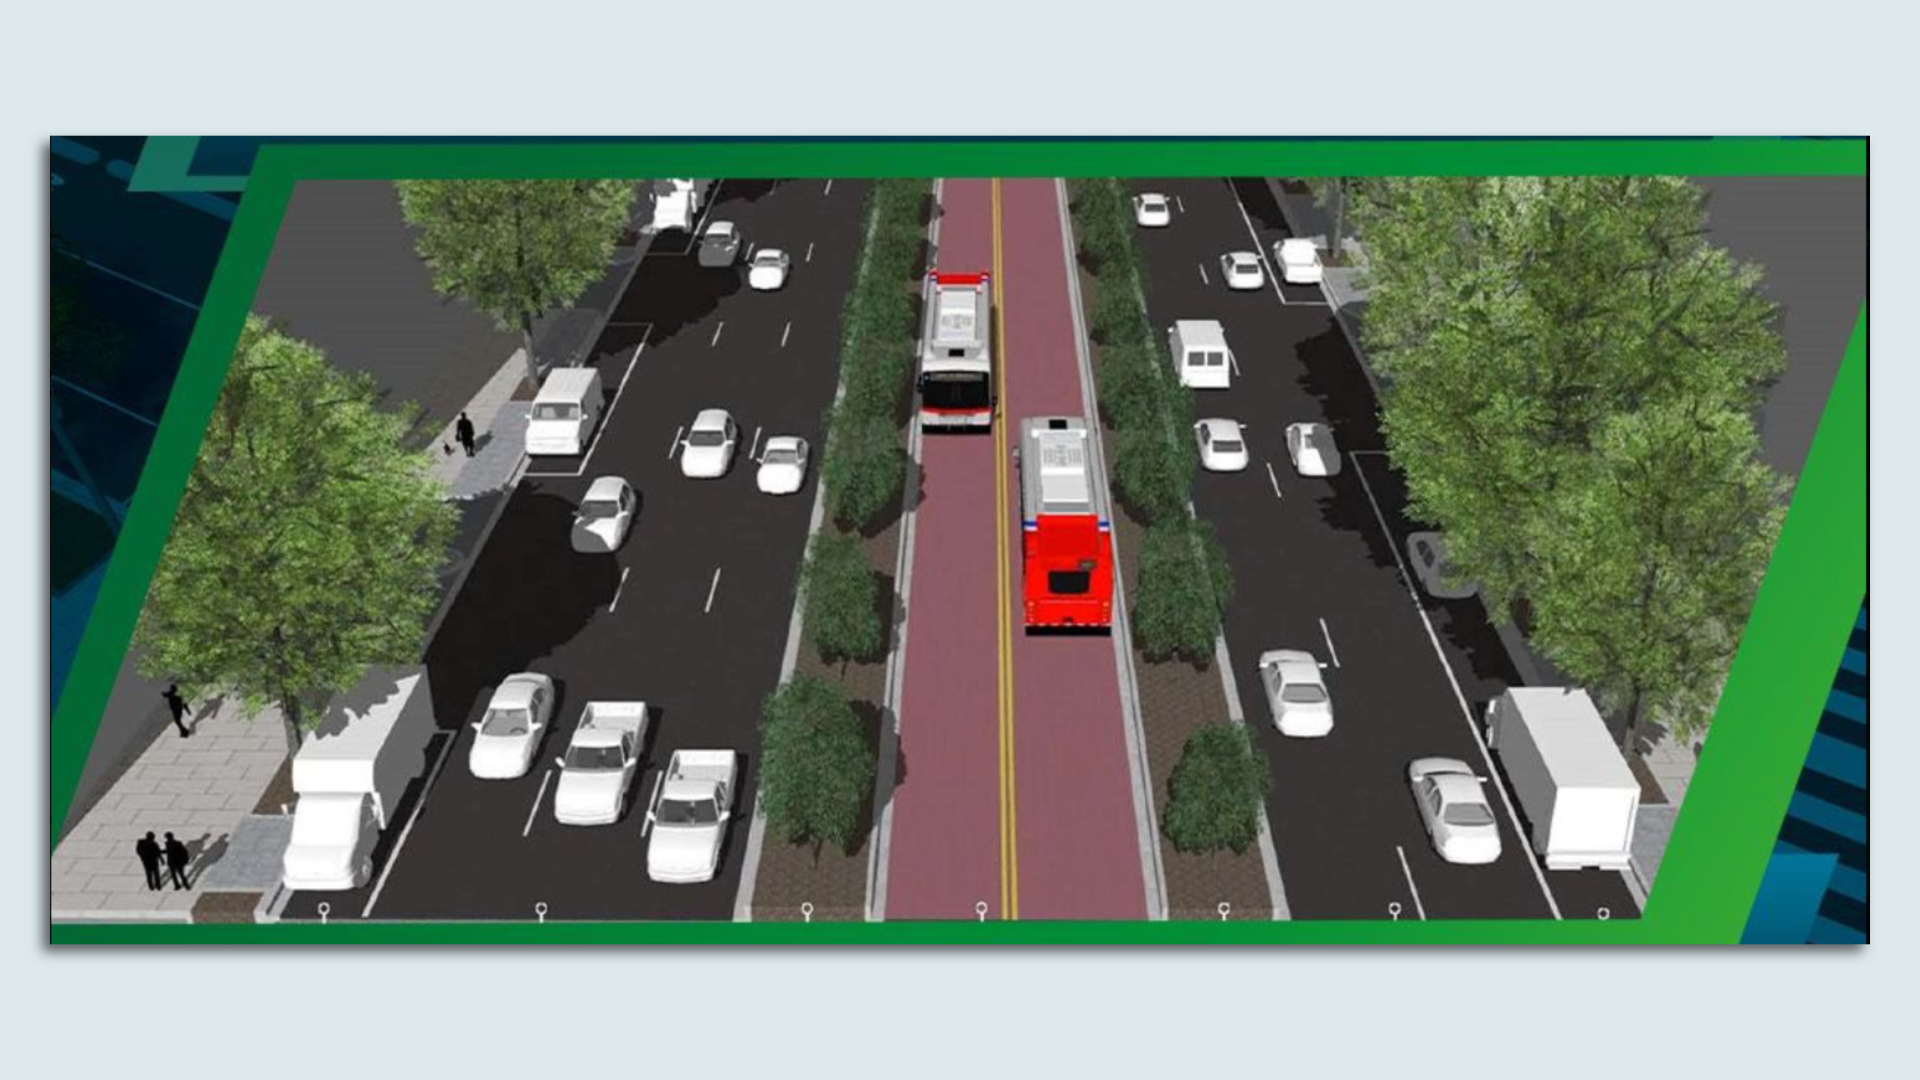 A rendering showing two center bus lanes and four car lanes on the left, and three on the right